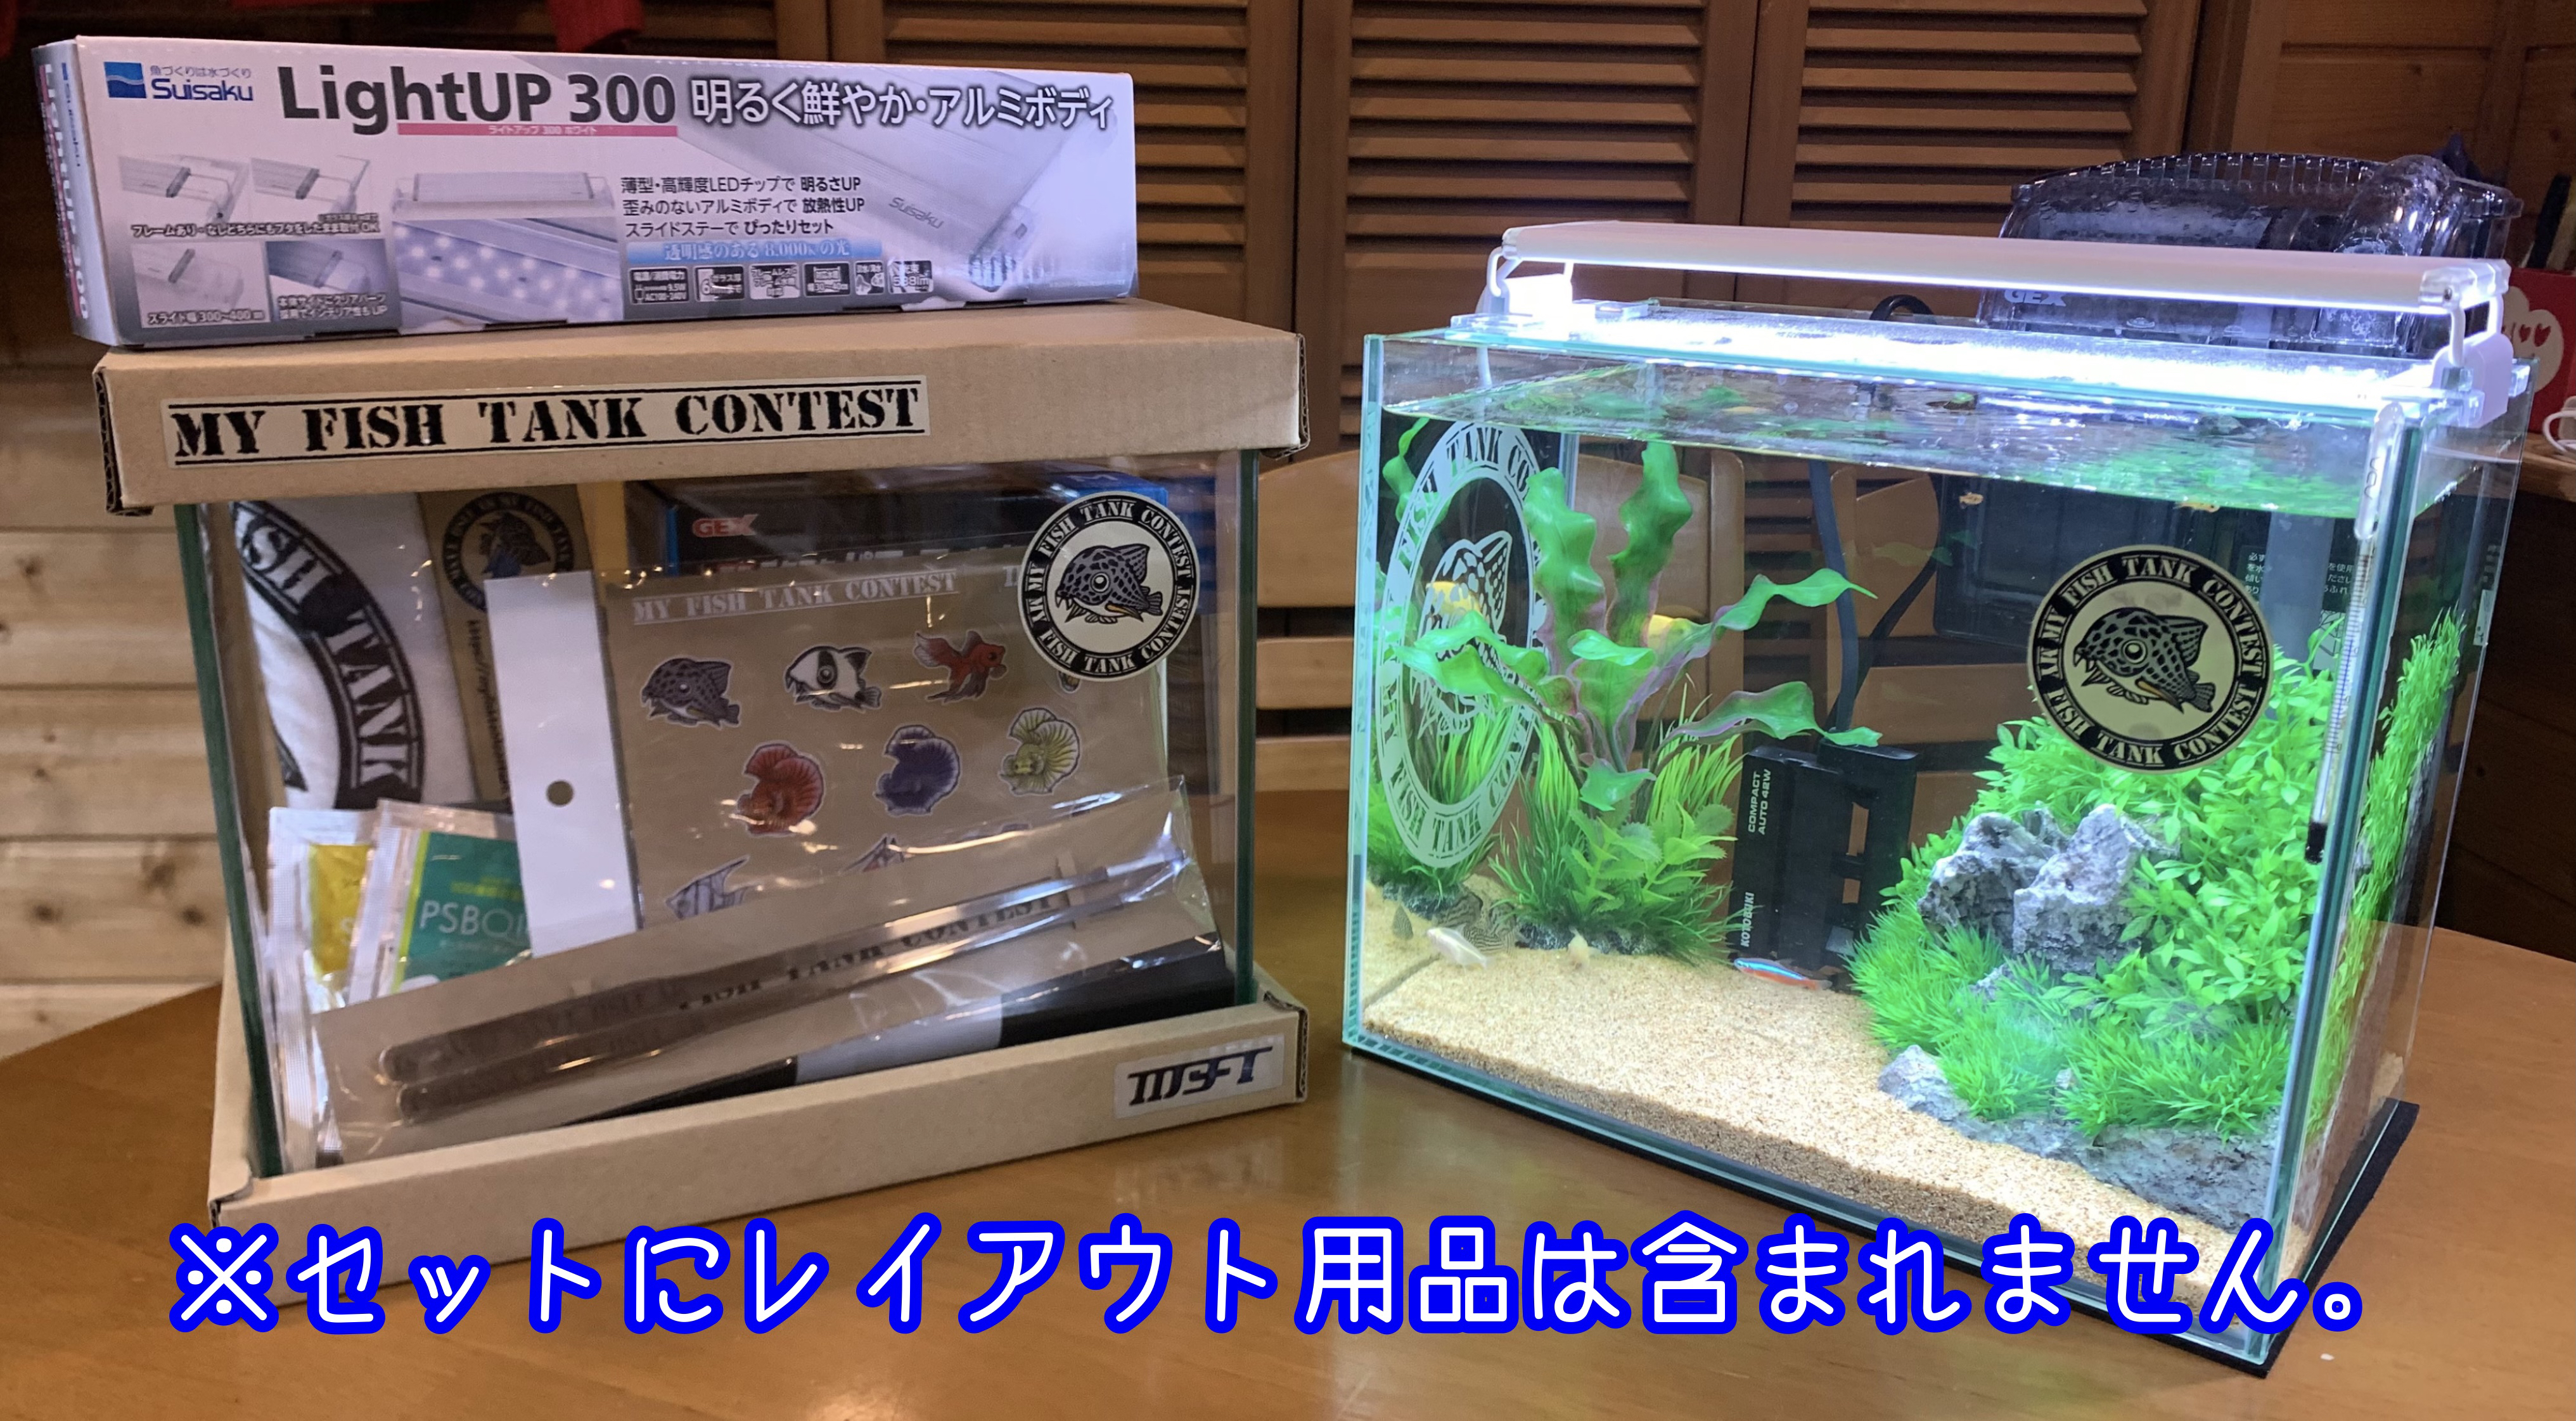 Mft Official 初心者応援 オリジナル熱帯魚飼育セット 送料無料 Mft Official Shop